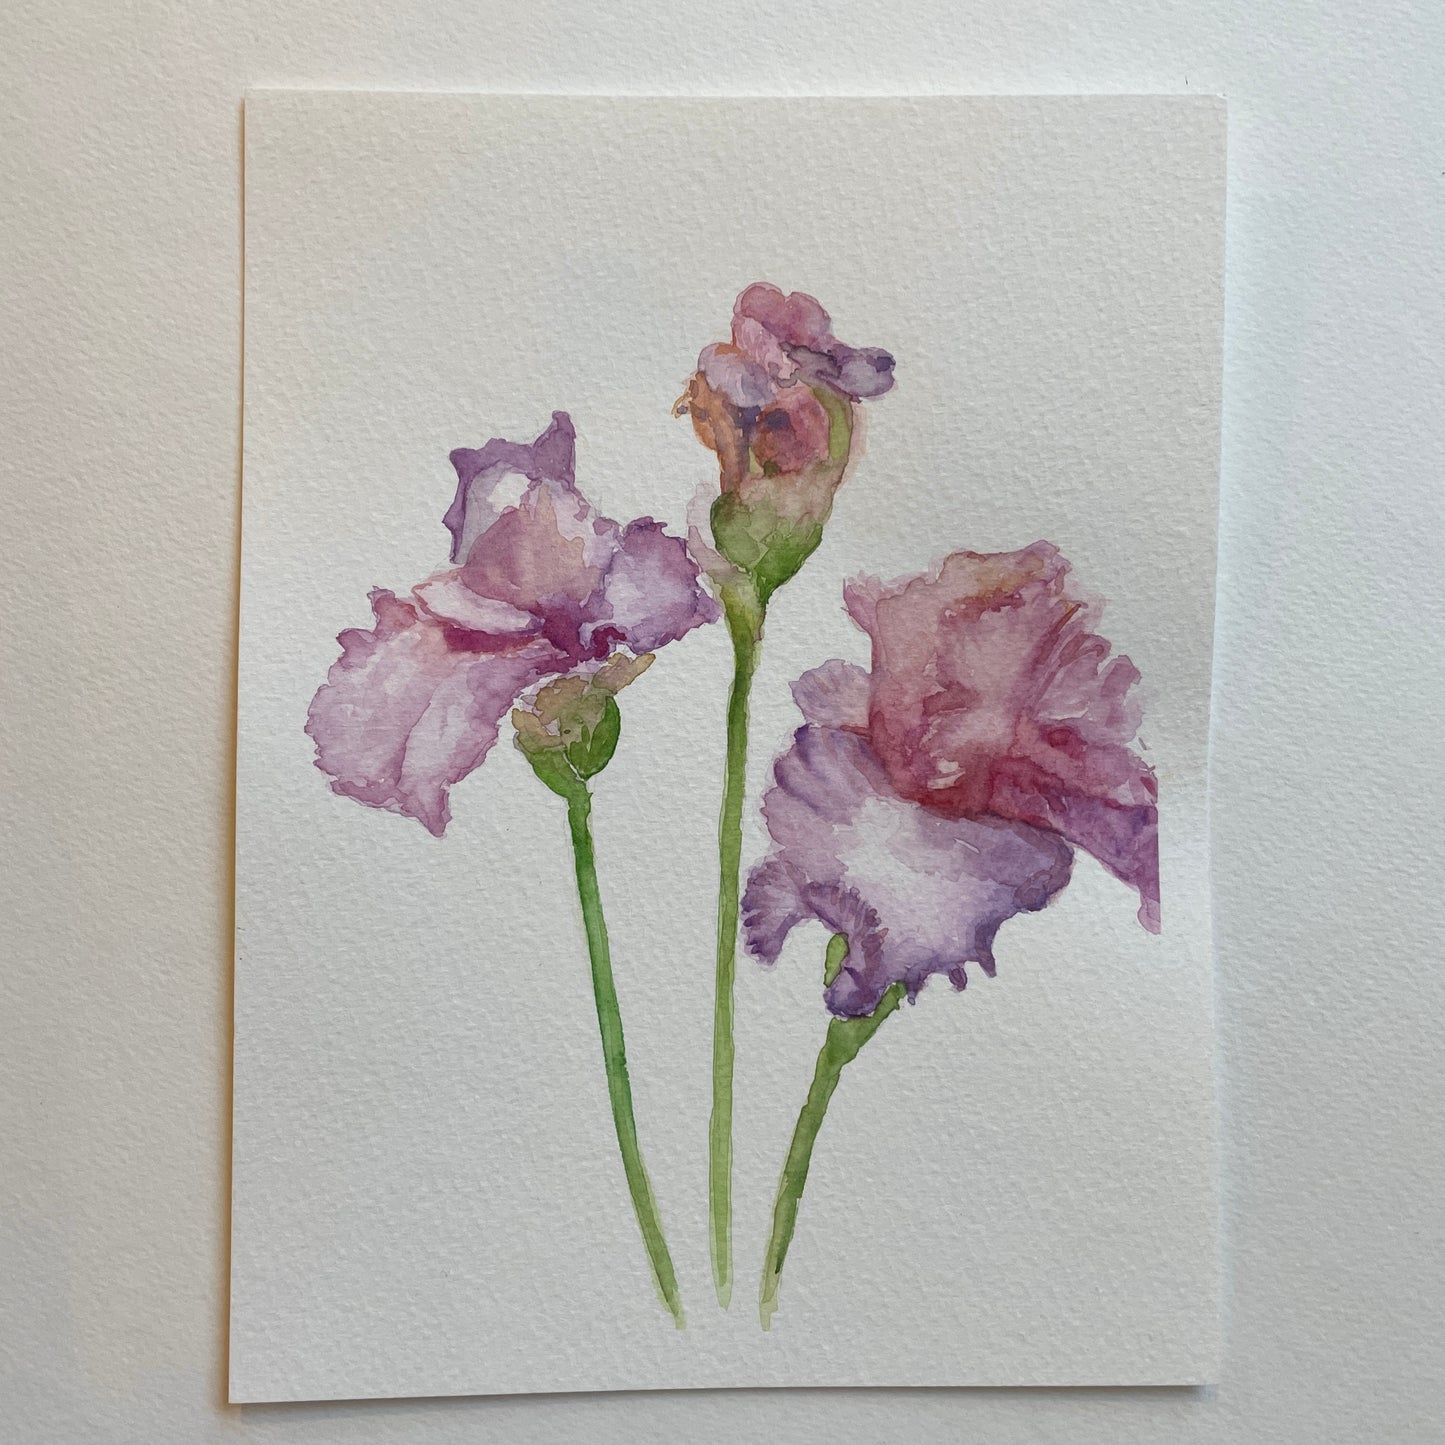 Pale Pink Iris: Together